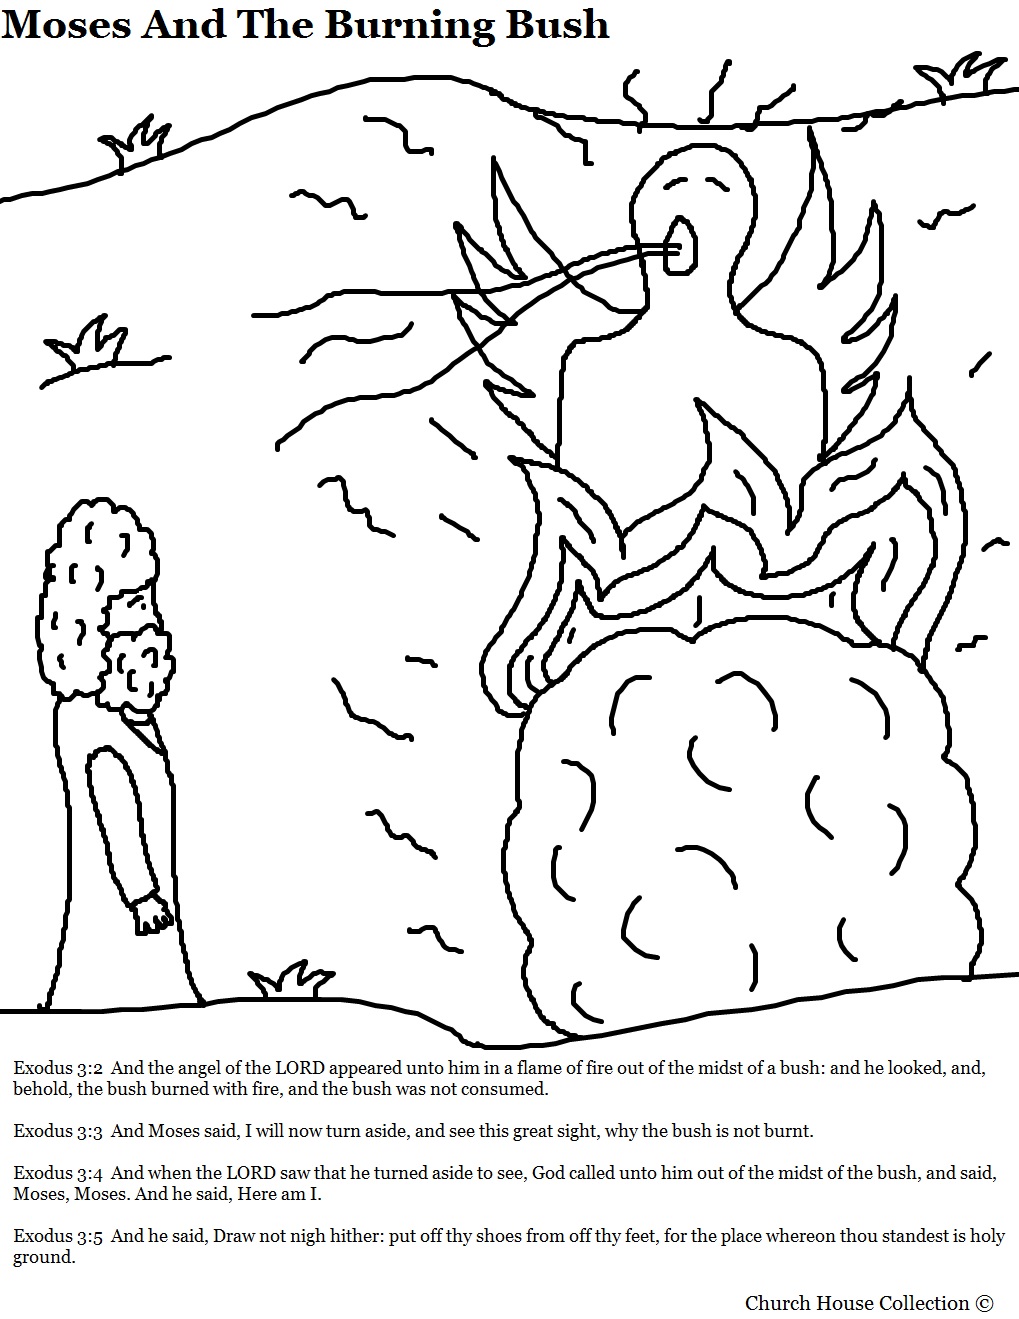 Church house collection blog moses and the burning bush coloring page